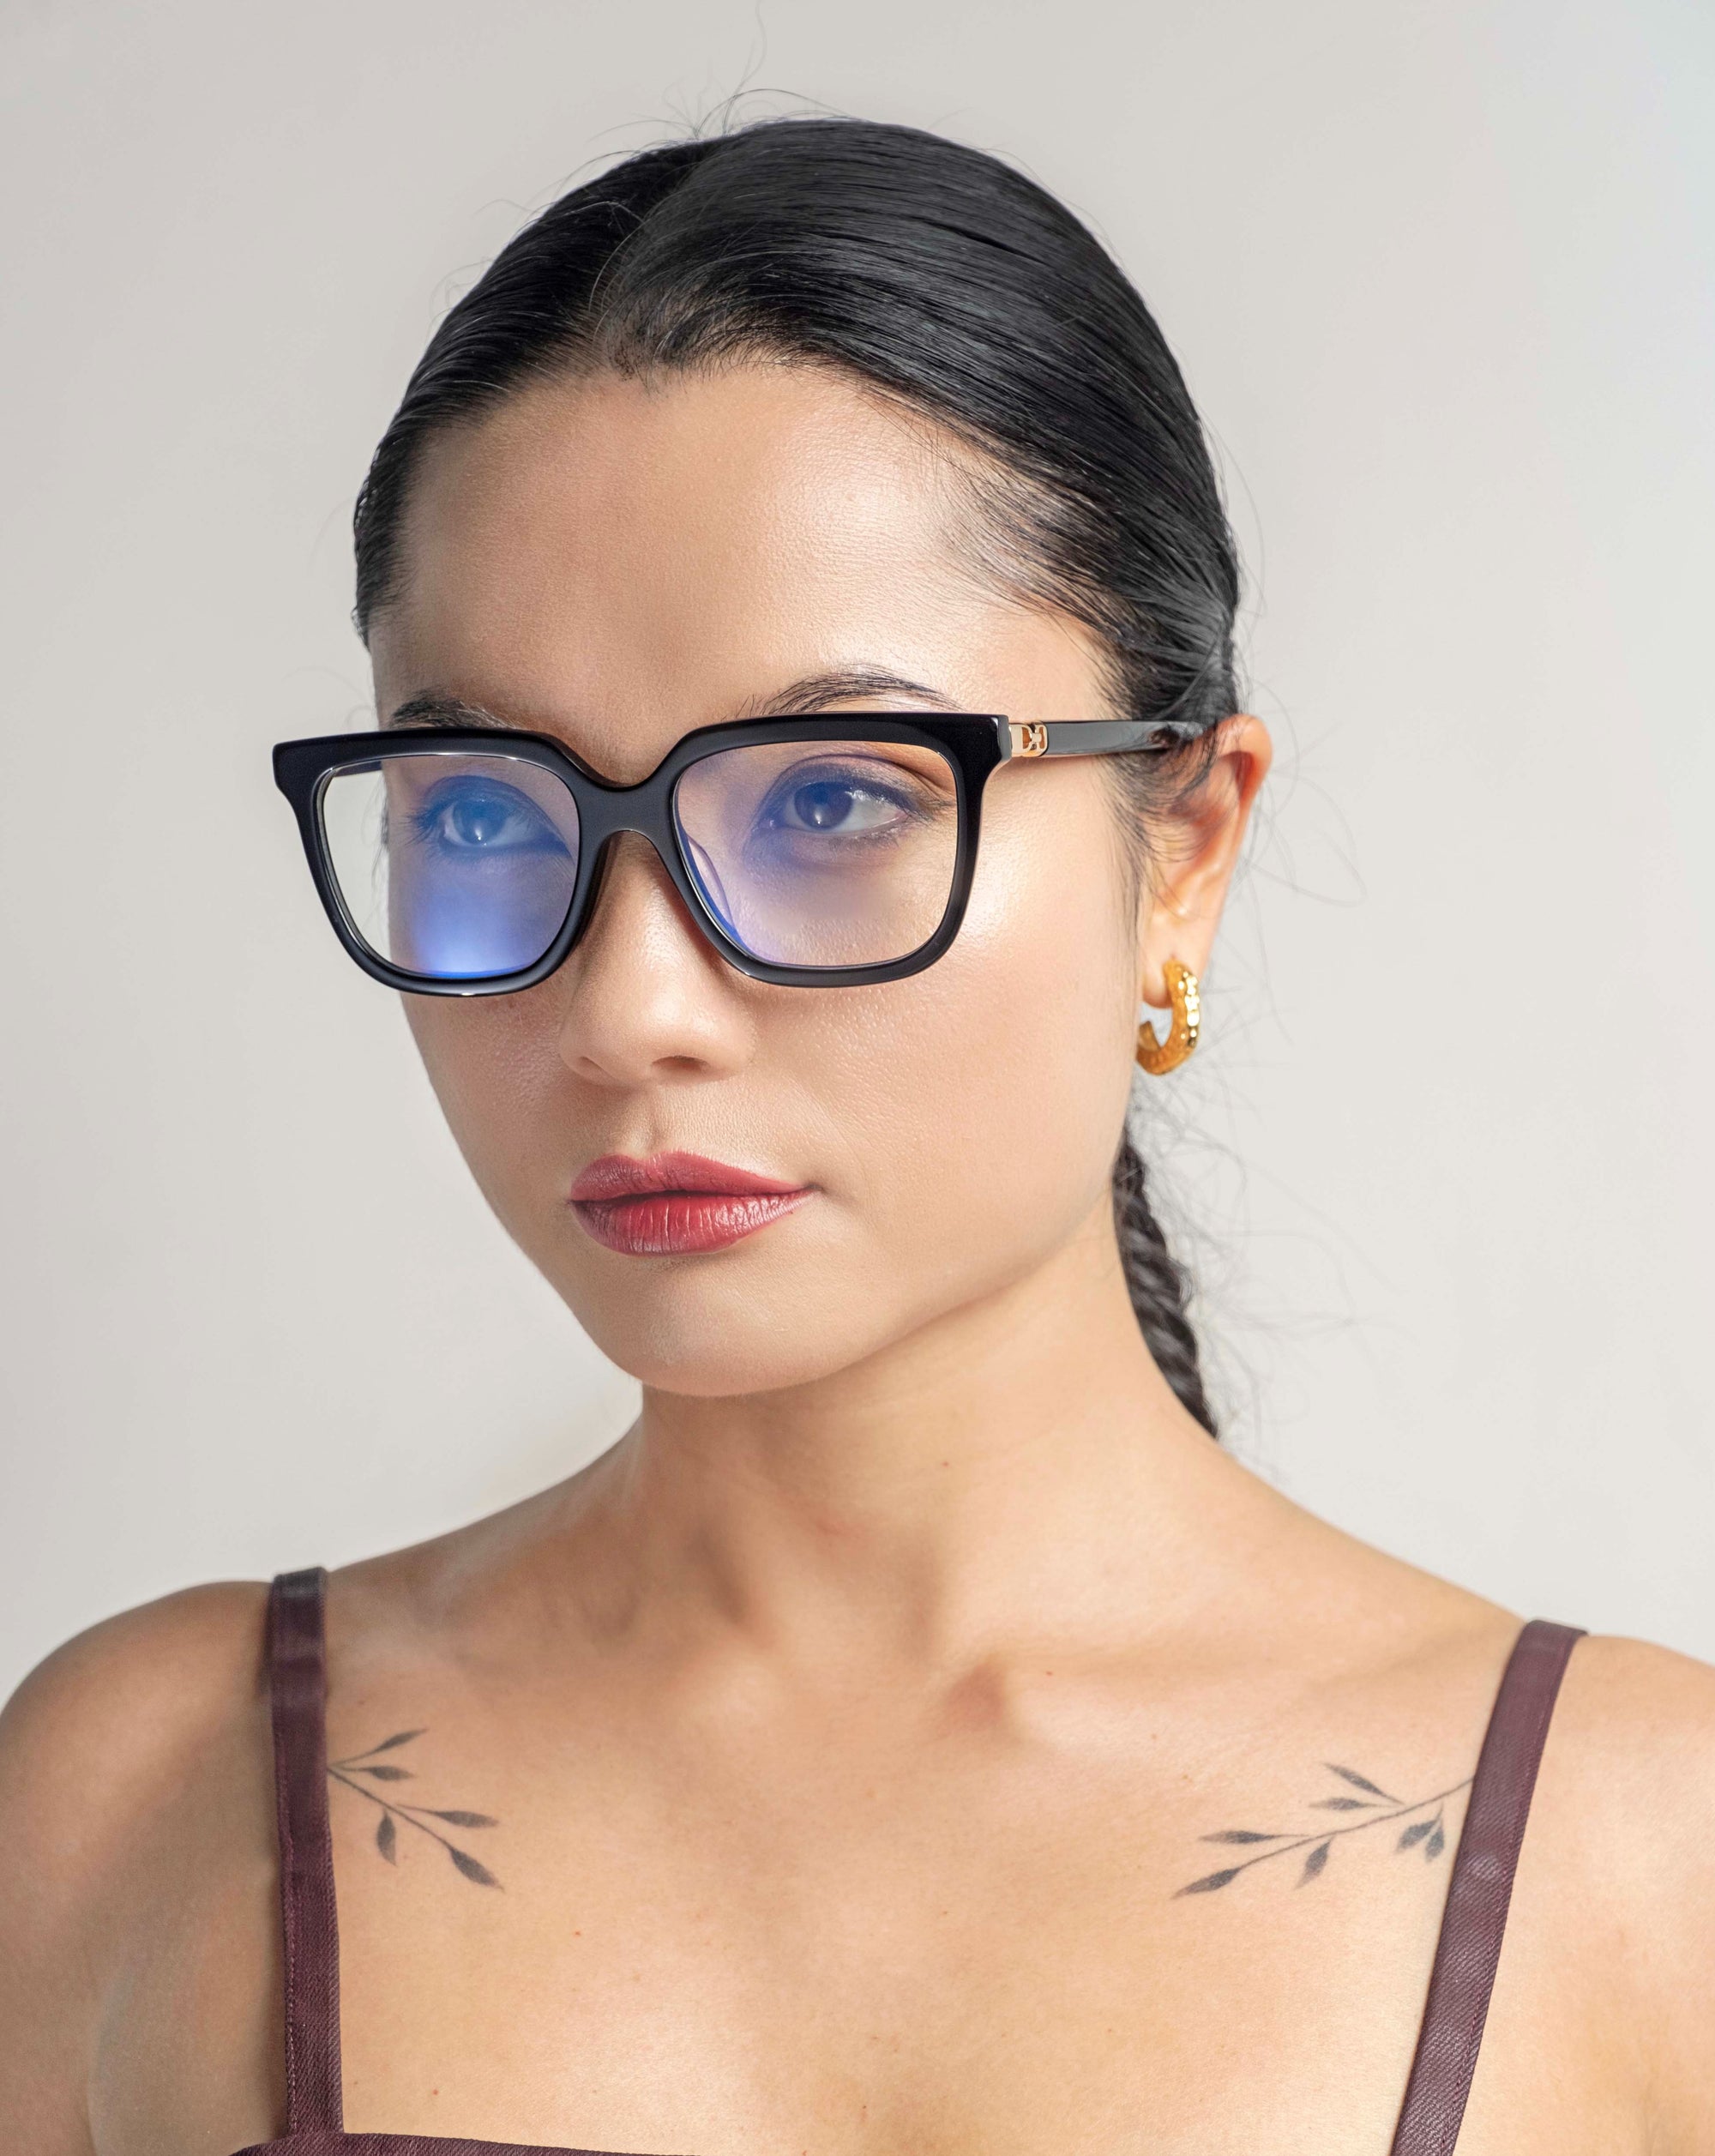 A person with long black hair, styled in a braid, is wearing Nina glasses from For Art's Sake® and 18-karat gold hoop earrings. They have subtle tattoos on their shoulders, visible due to the sleeveless top they are wearing. The background is light and plain.